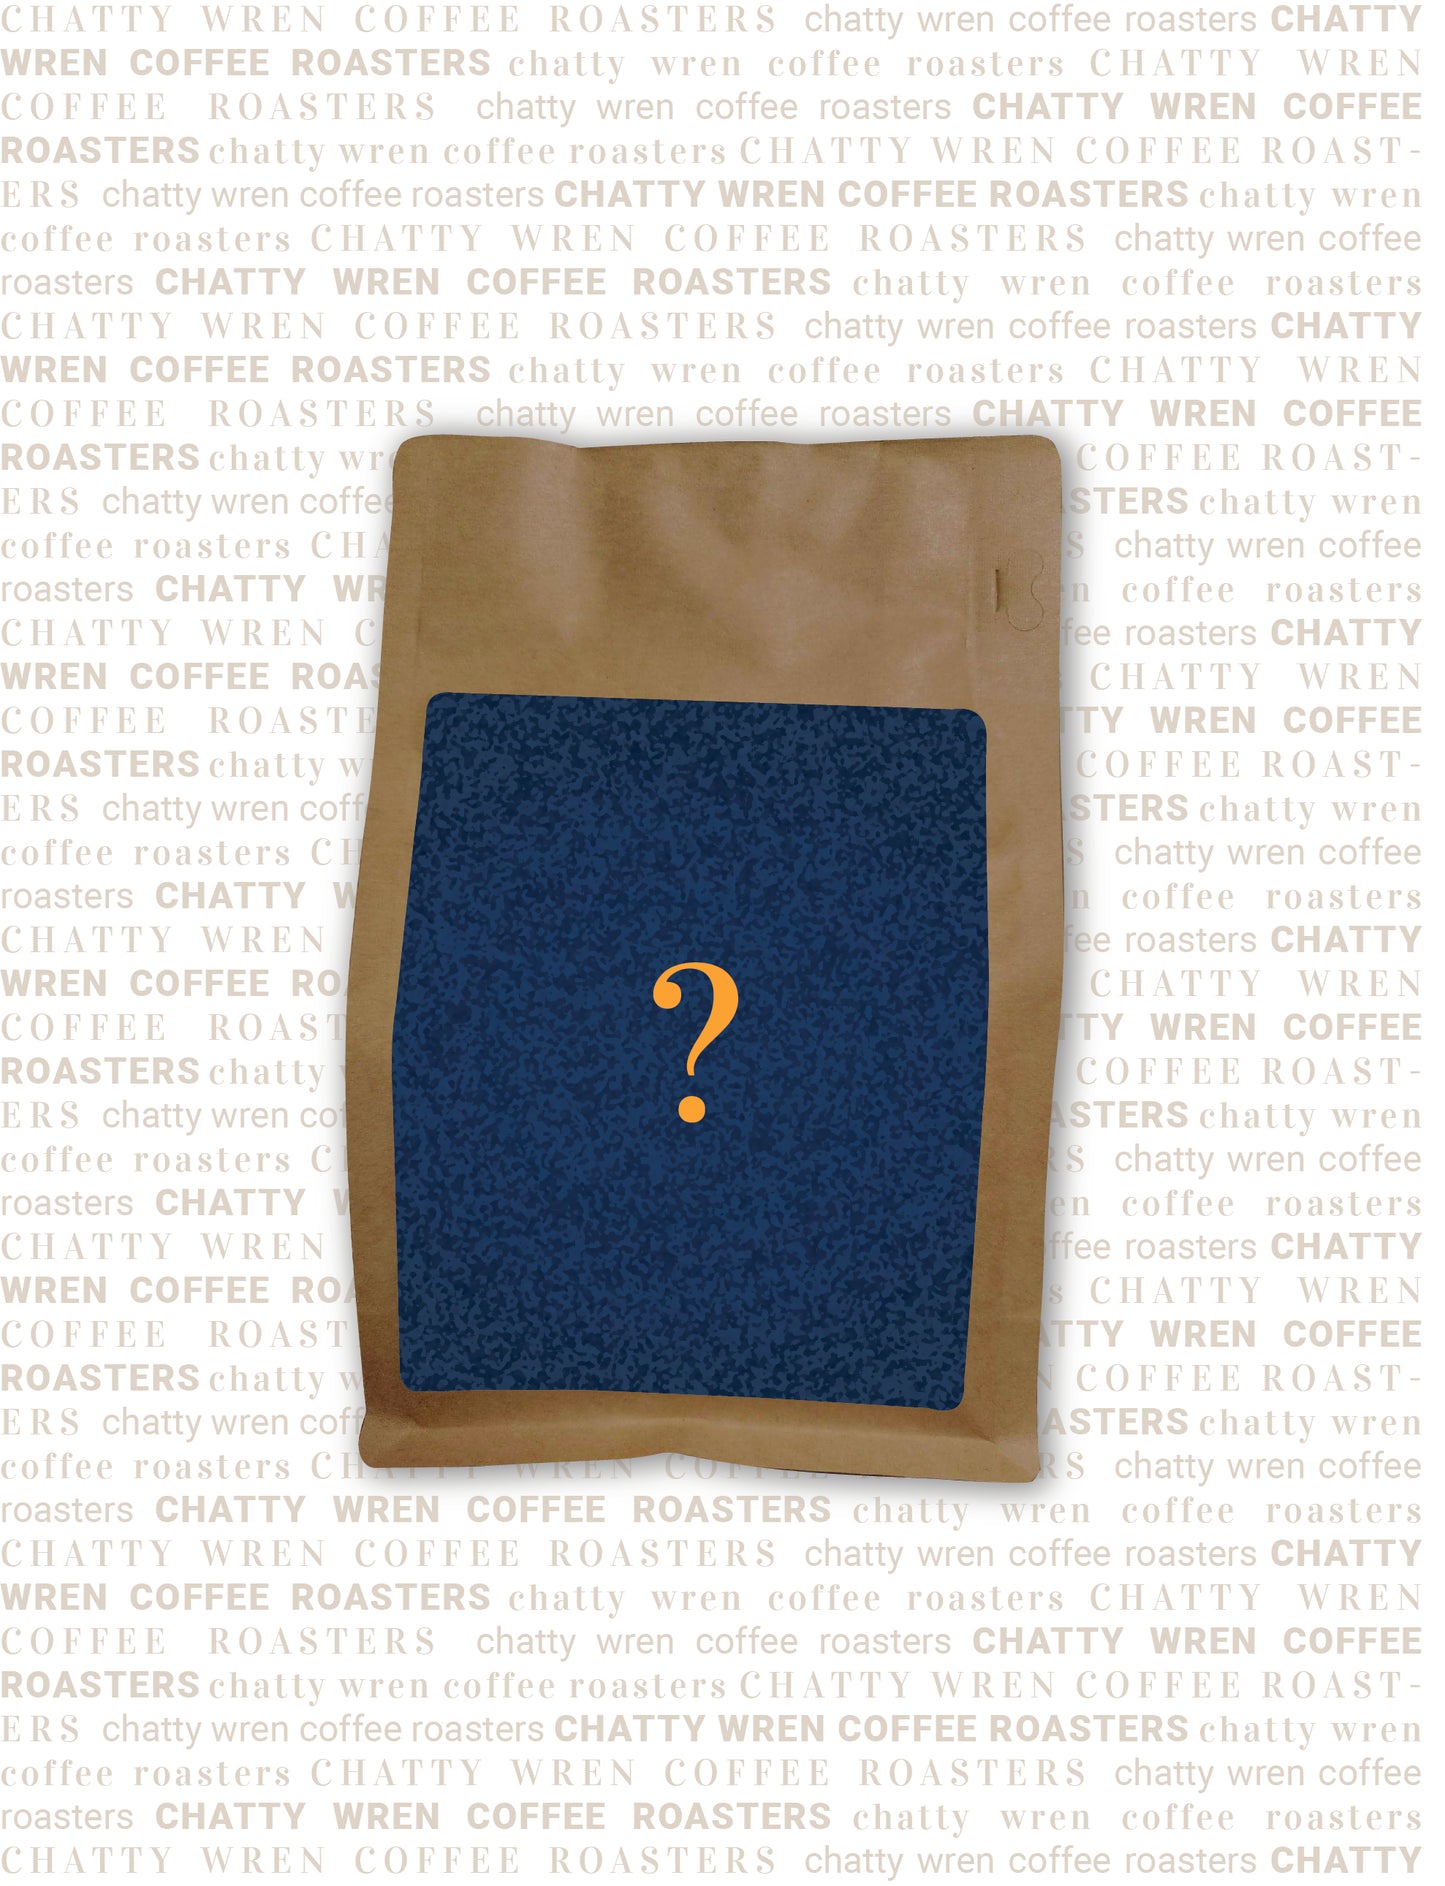 Chatty Wren coffee bag with orange question mark